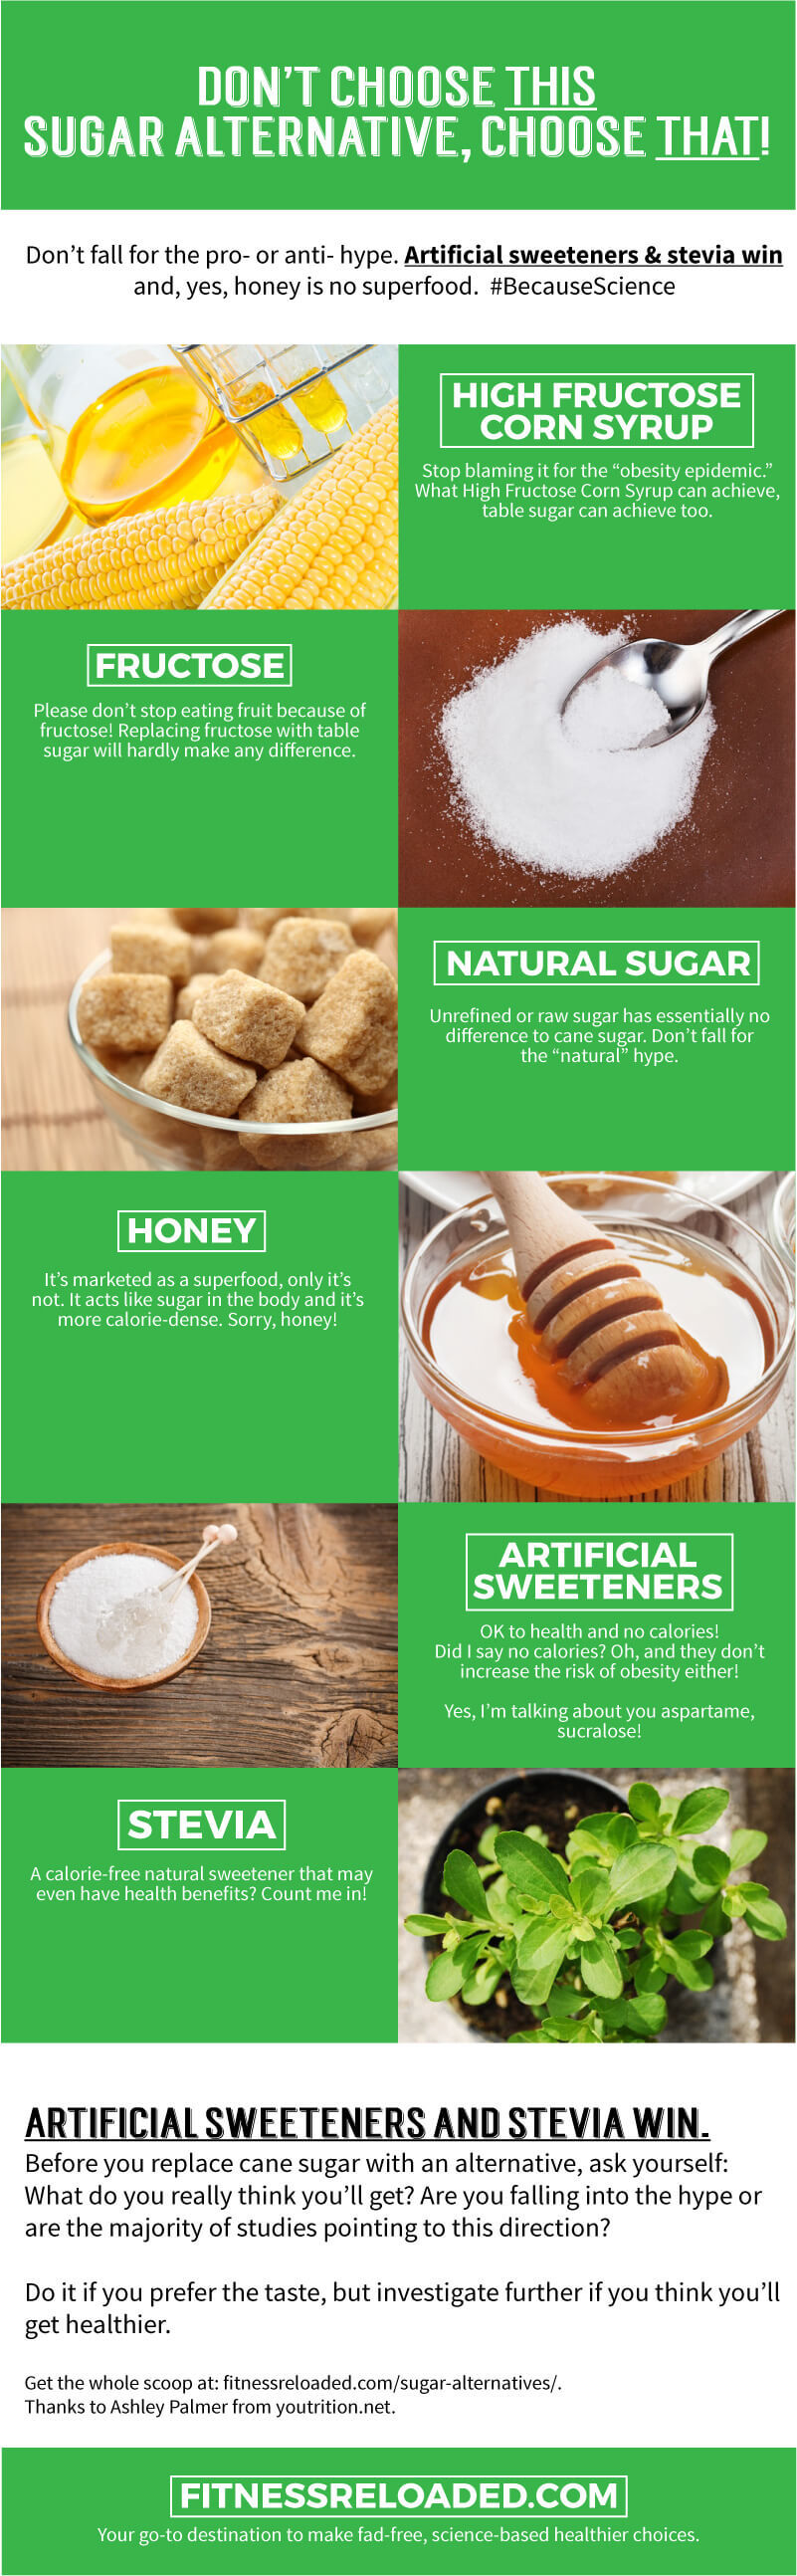 Sugar Alternatives: Don’t fall for the pro- or anti- hype. Artificial sweeteners & stevia actually win and, no, honey is not a superfood. #BecauseScience